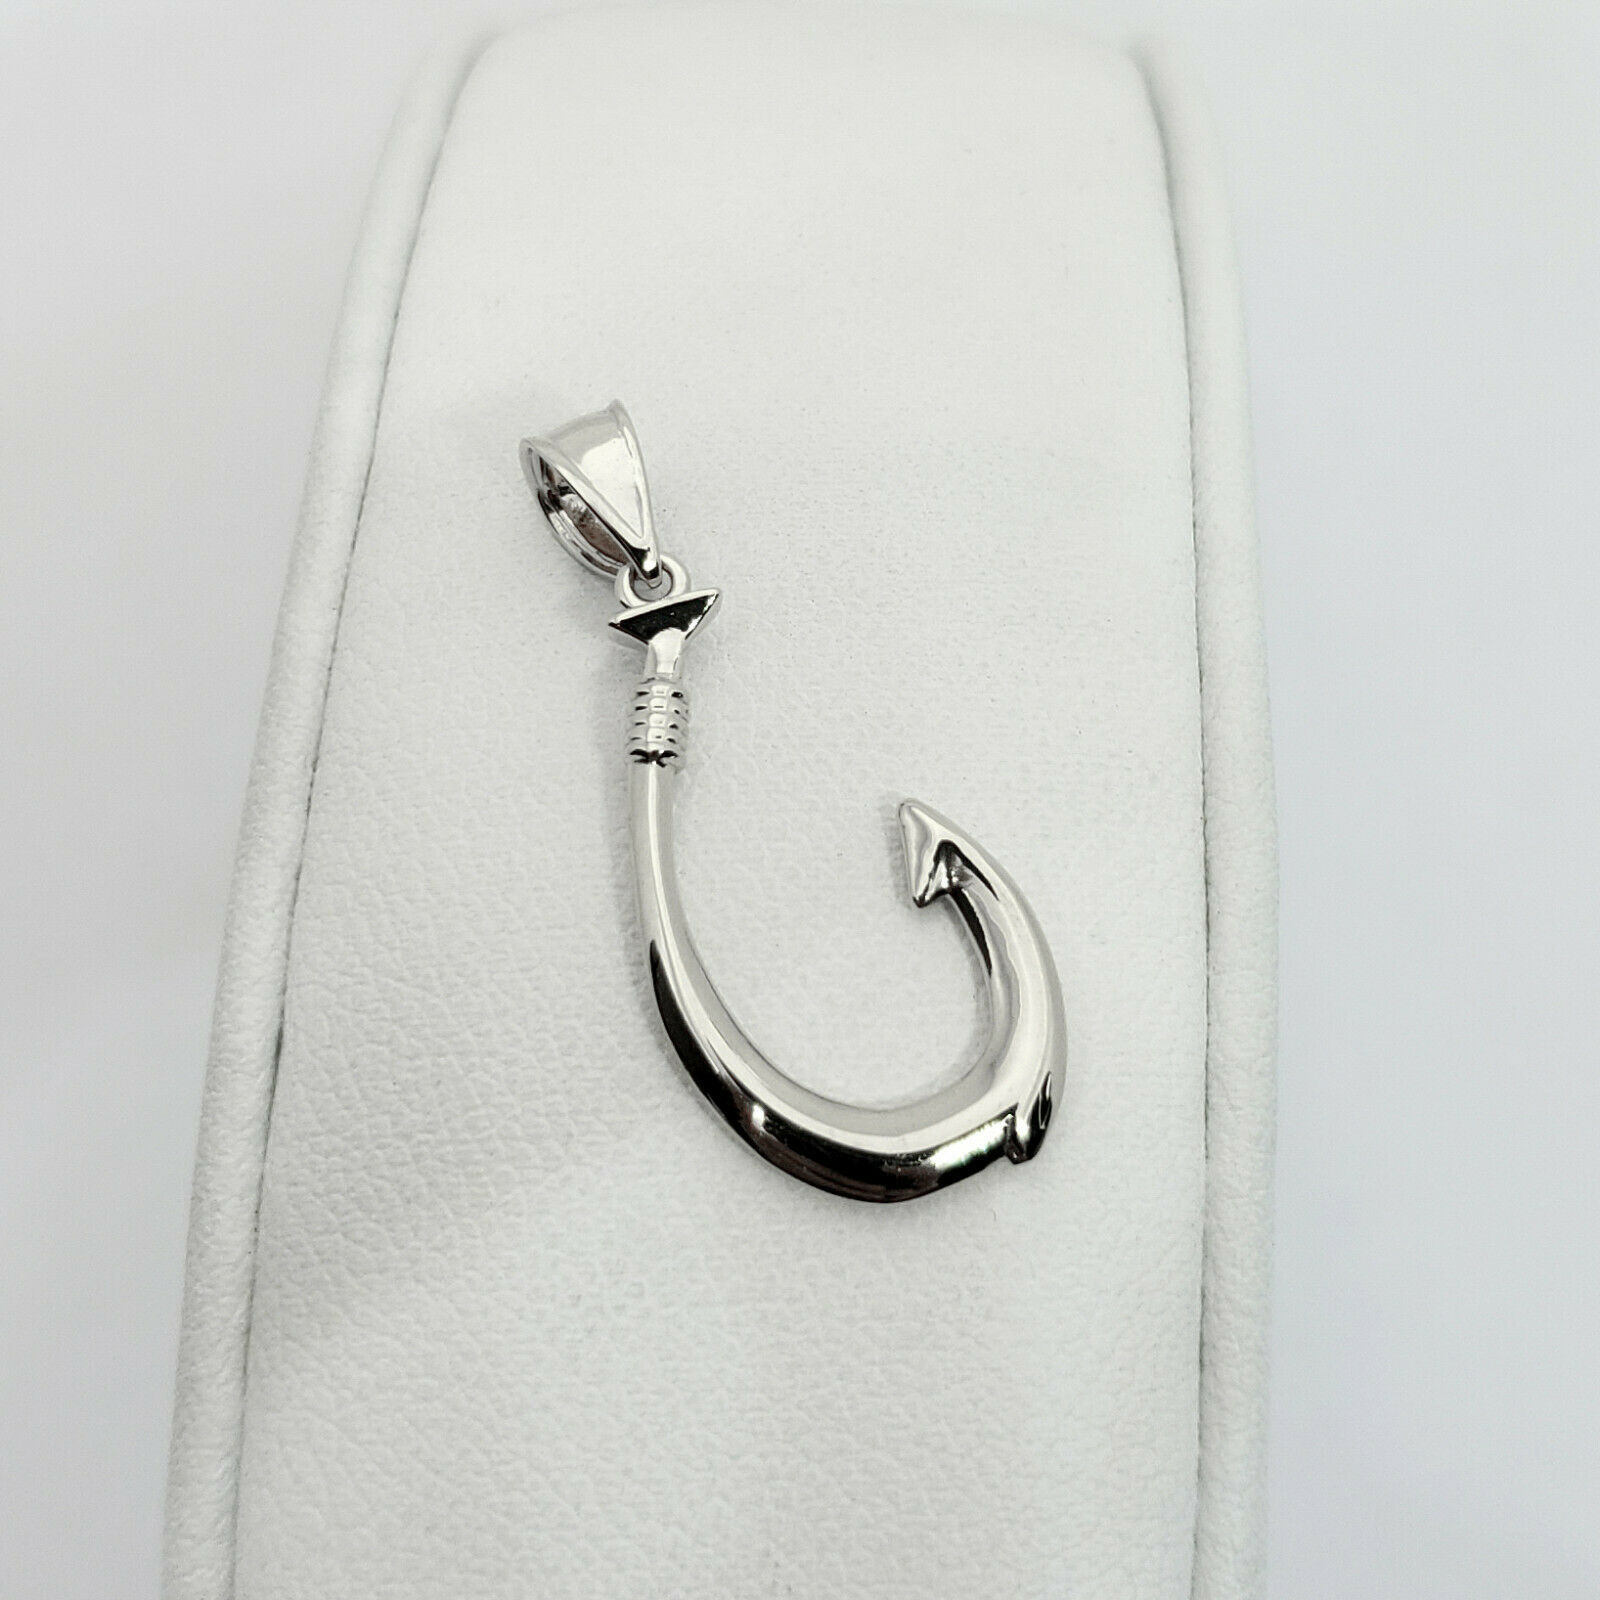 Fishing Hook Solid White Gold  Pendant 